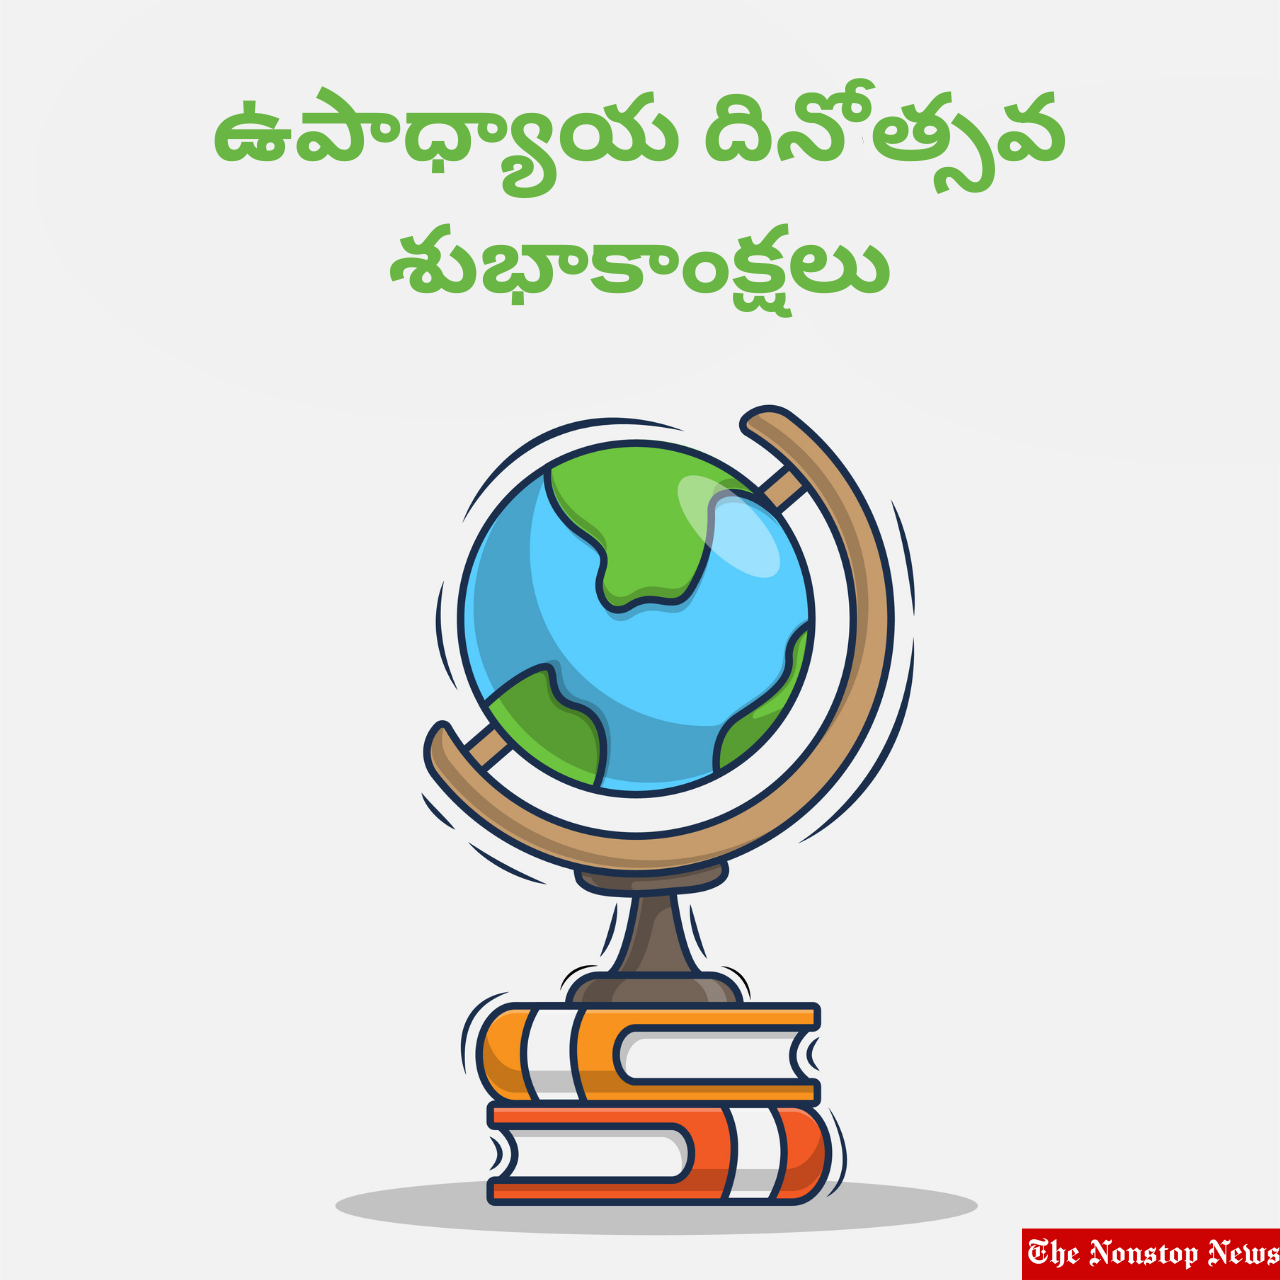 Happy Teacher's Day 2021 Telugu Wishes, Quotes, Messages, Images, and Greetings for Principal